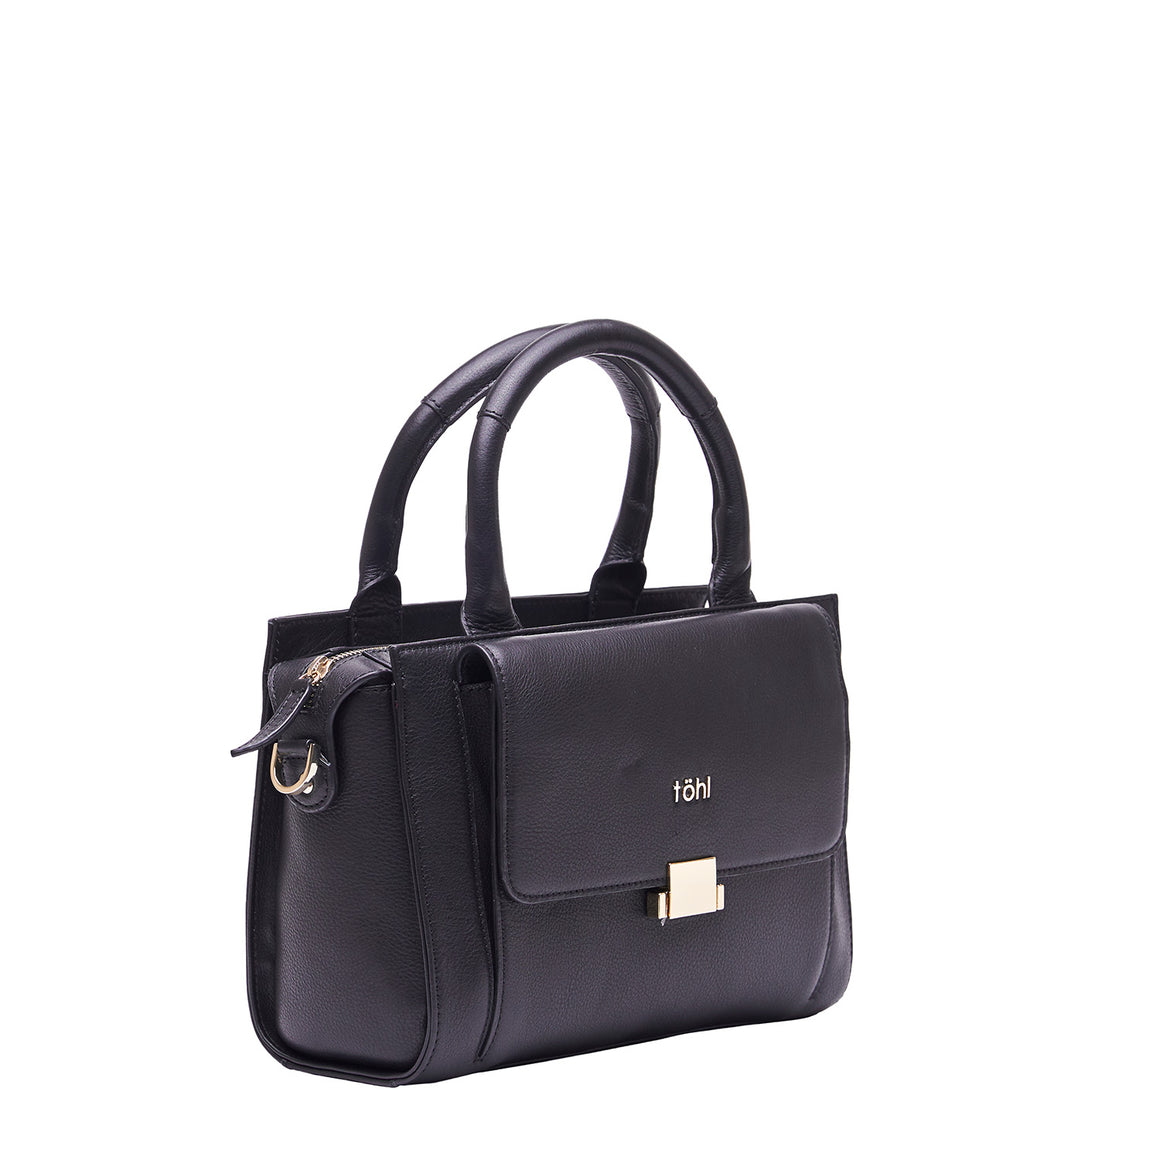 CHISWELL WOMEN'S HAND BAG - CHARCOAL BLACK